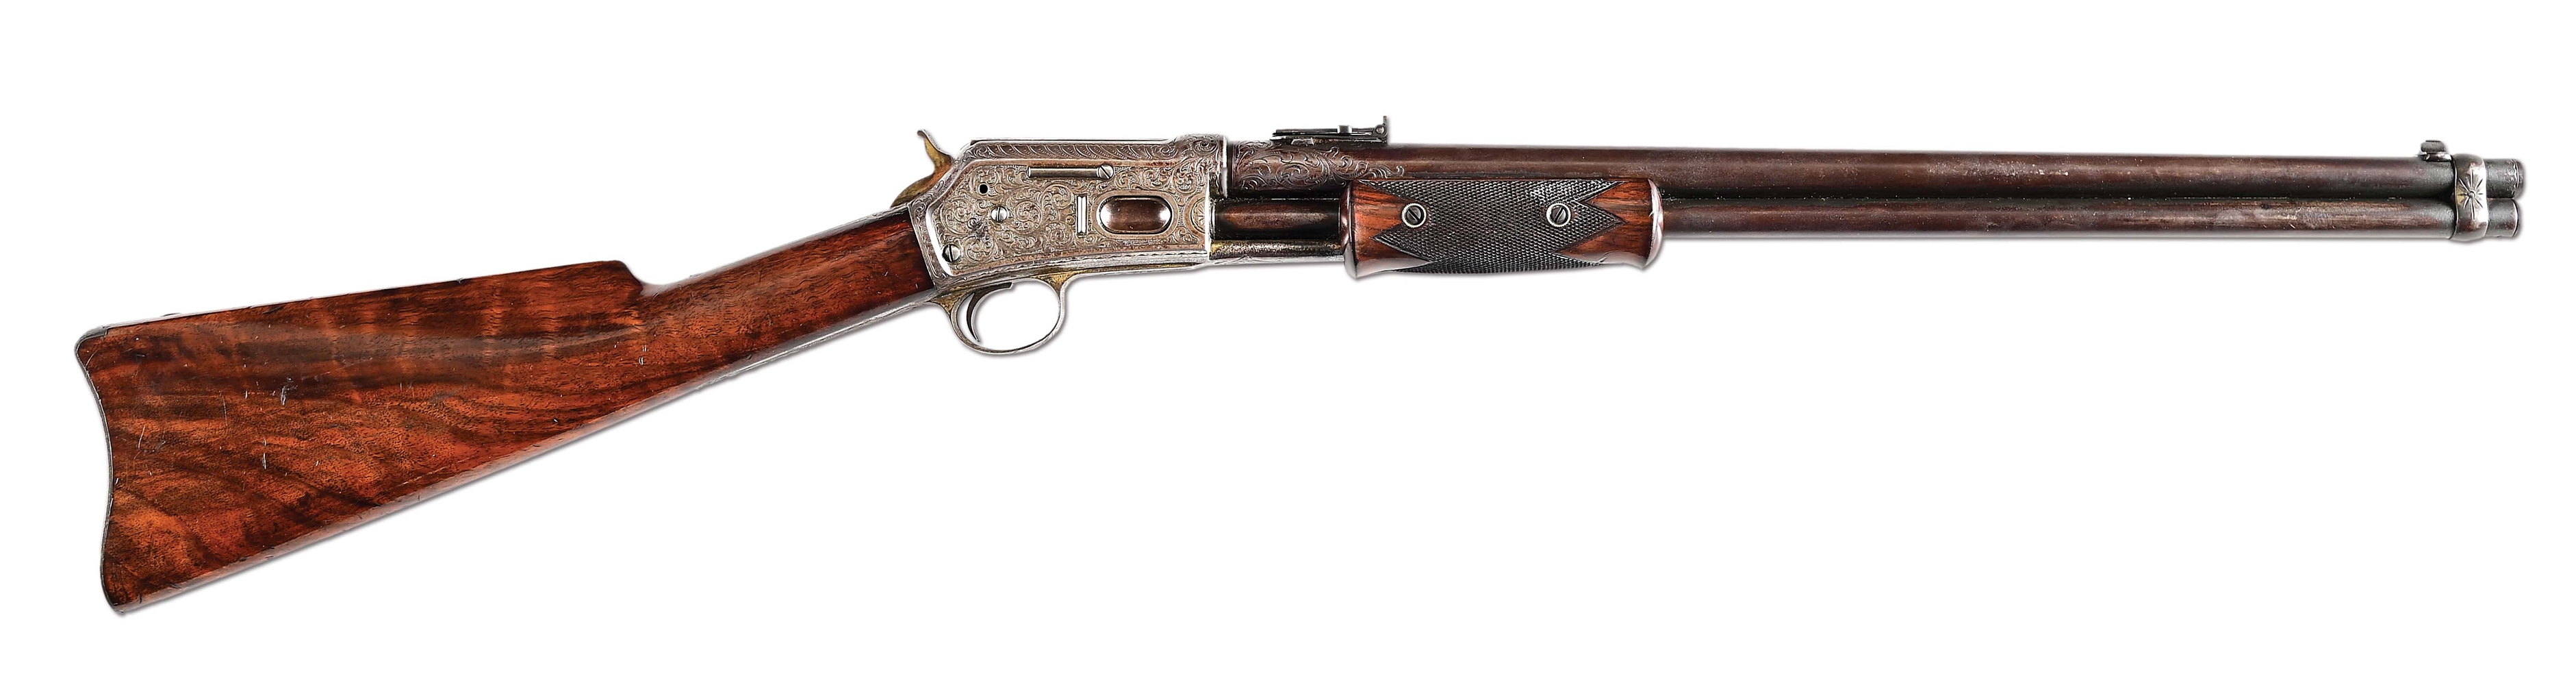 (A) DOCUMENTED SMOOTHBORE NIMSCHKE ENGRAVED COLT LIGHTNING MAGAZINE RIFLE INSCRIBED TO THE BUFFALO BILL WILD WEST SHOW.